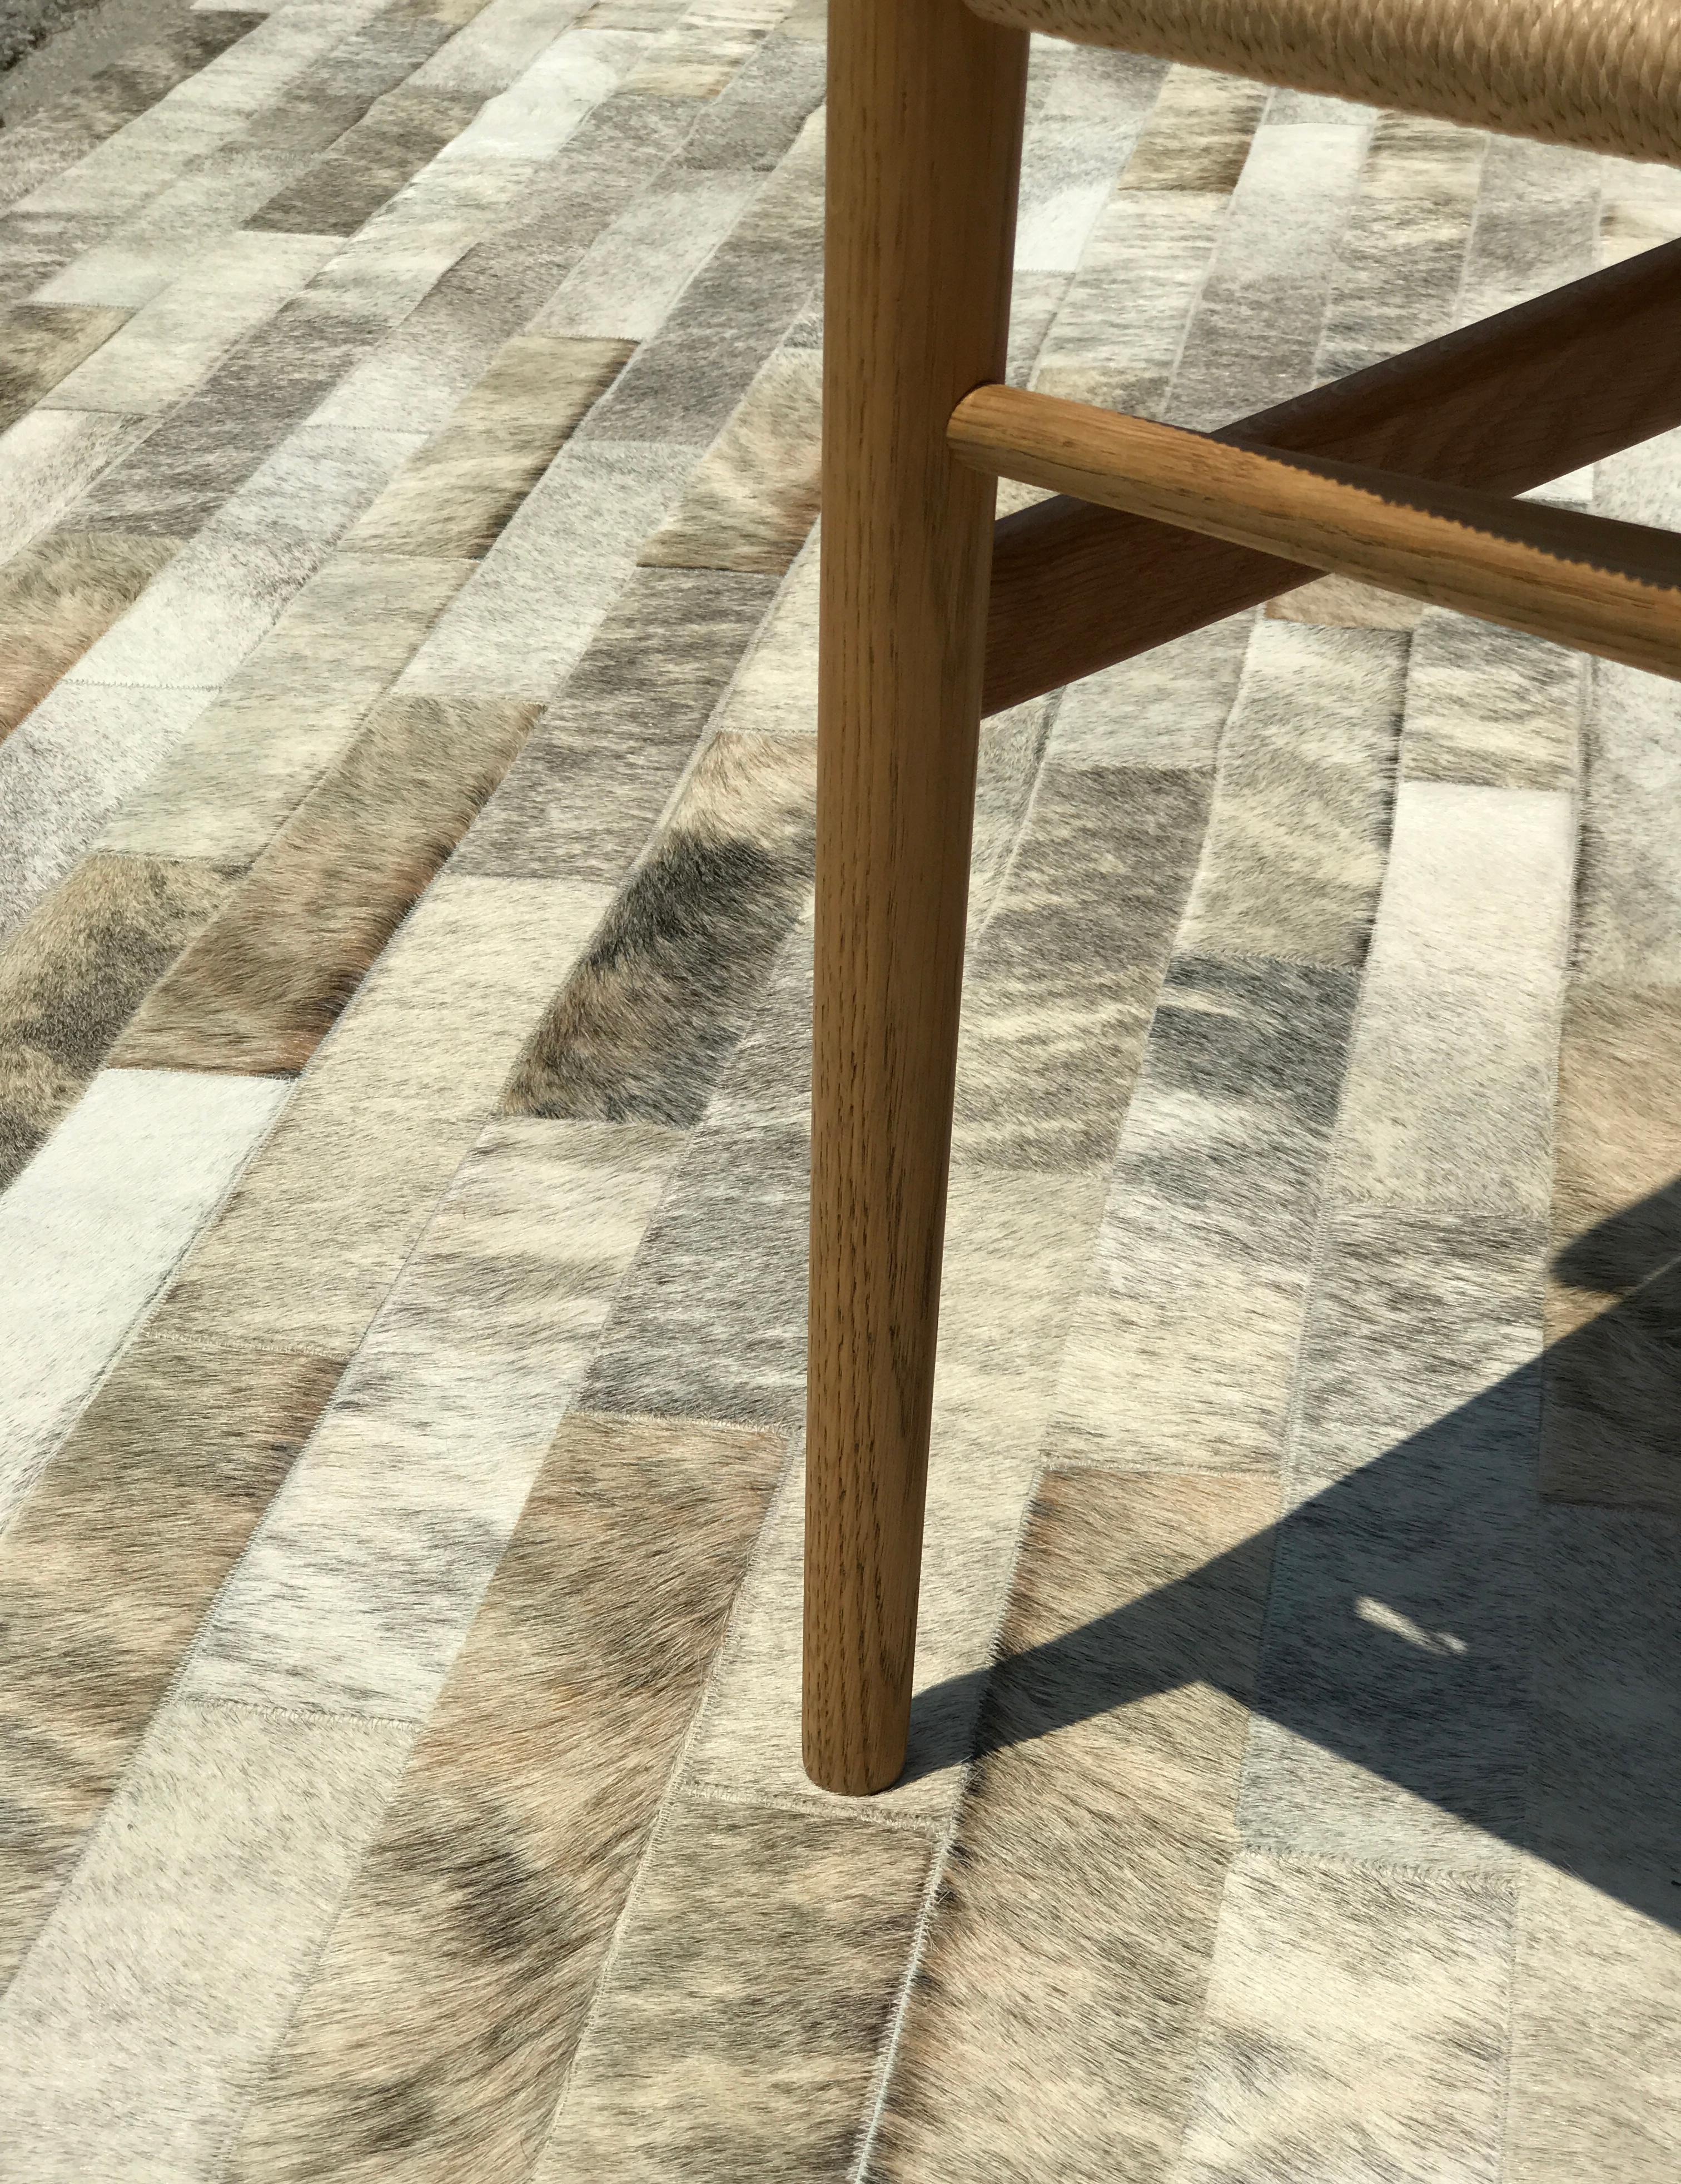 Pure by Grand Splendid
Inspired by British brick architecture from the early 20th century, the Linea cowhide rug features a sleek, linear pattern and a deliciously natural surface. Made with light brindle cowhide, the Linea Light Brindle features a